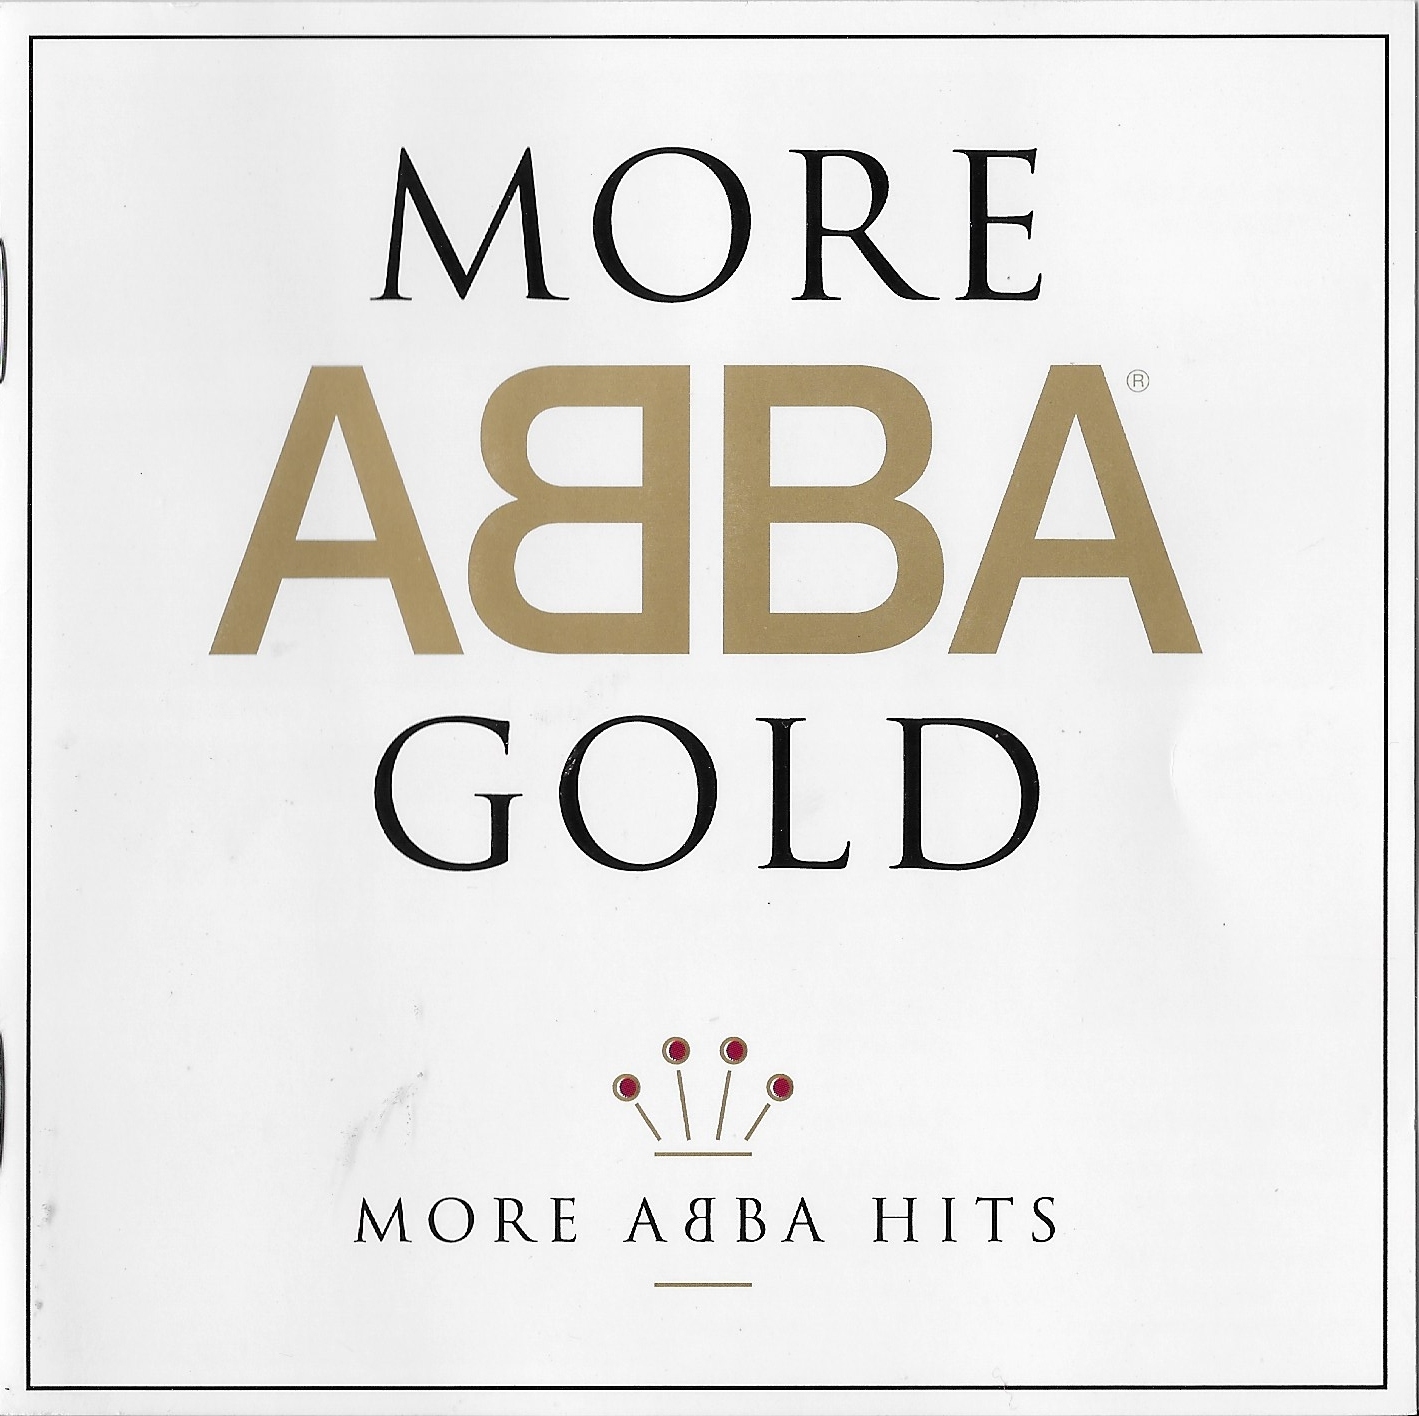 Picture of More Abba gold - More Abba hits by artist Abba 